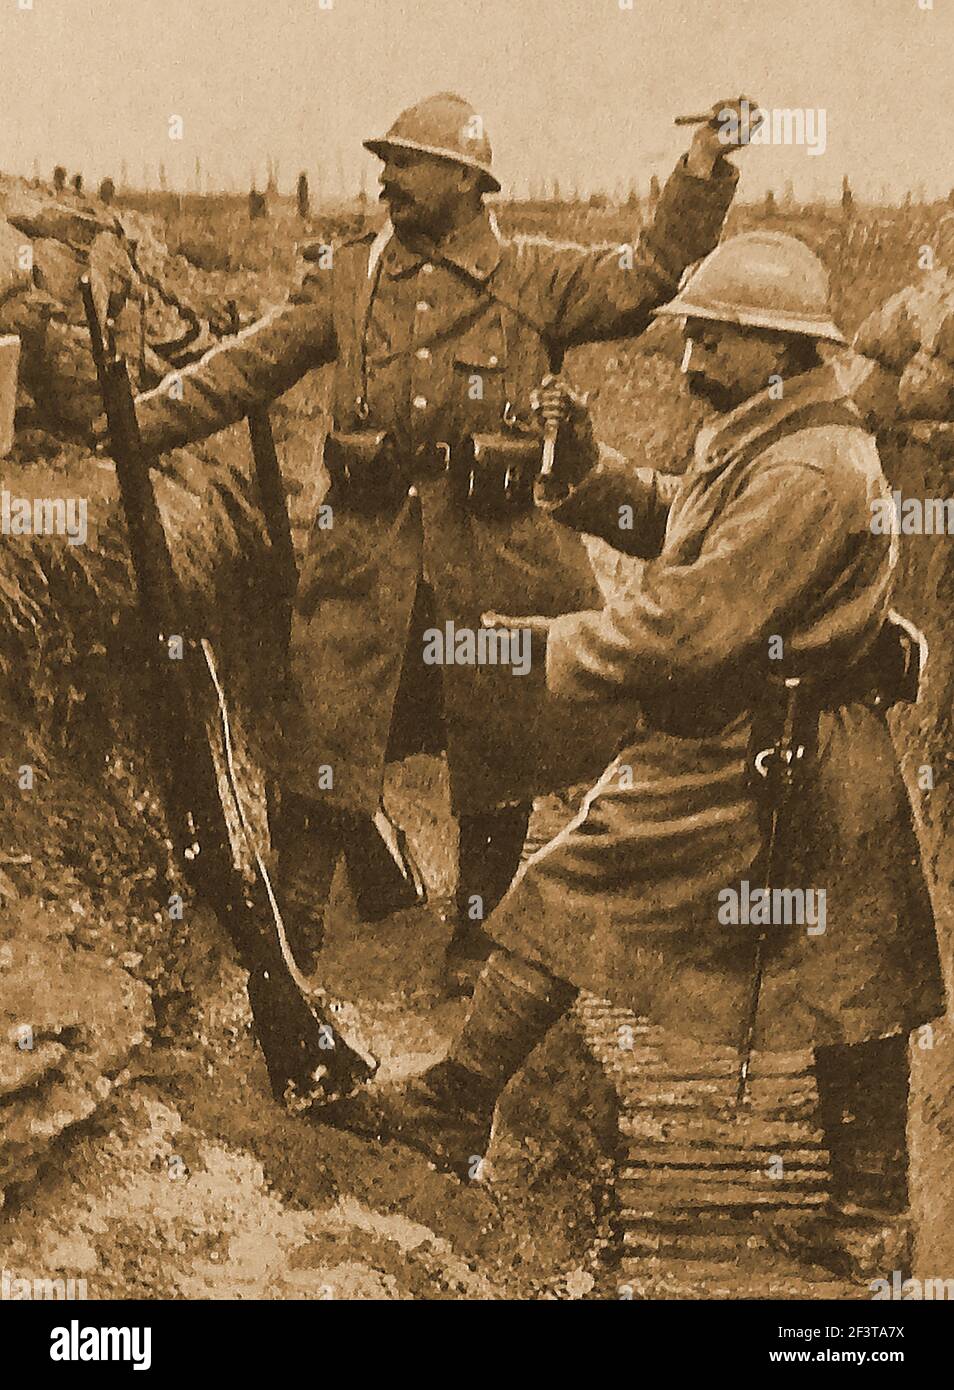 WWI - Trench warfare - French soldiers before Verdun throwing hand grenades across the neutral zone to the German lines. Stock Photo